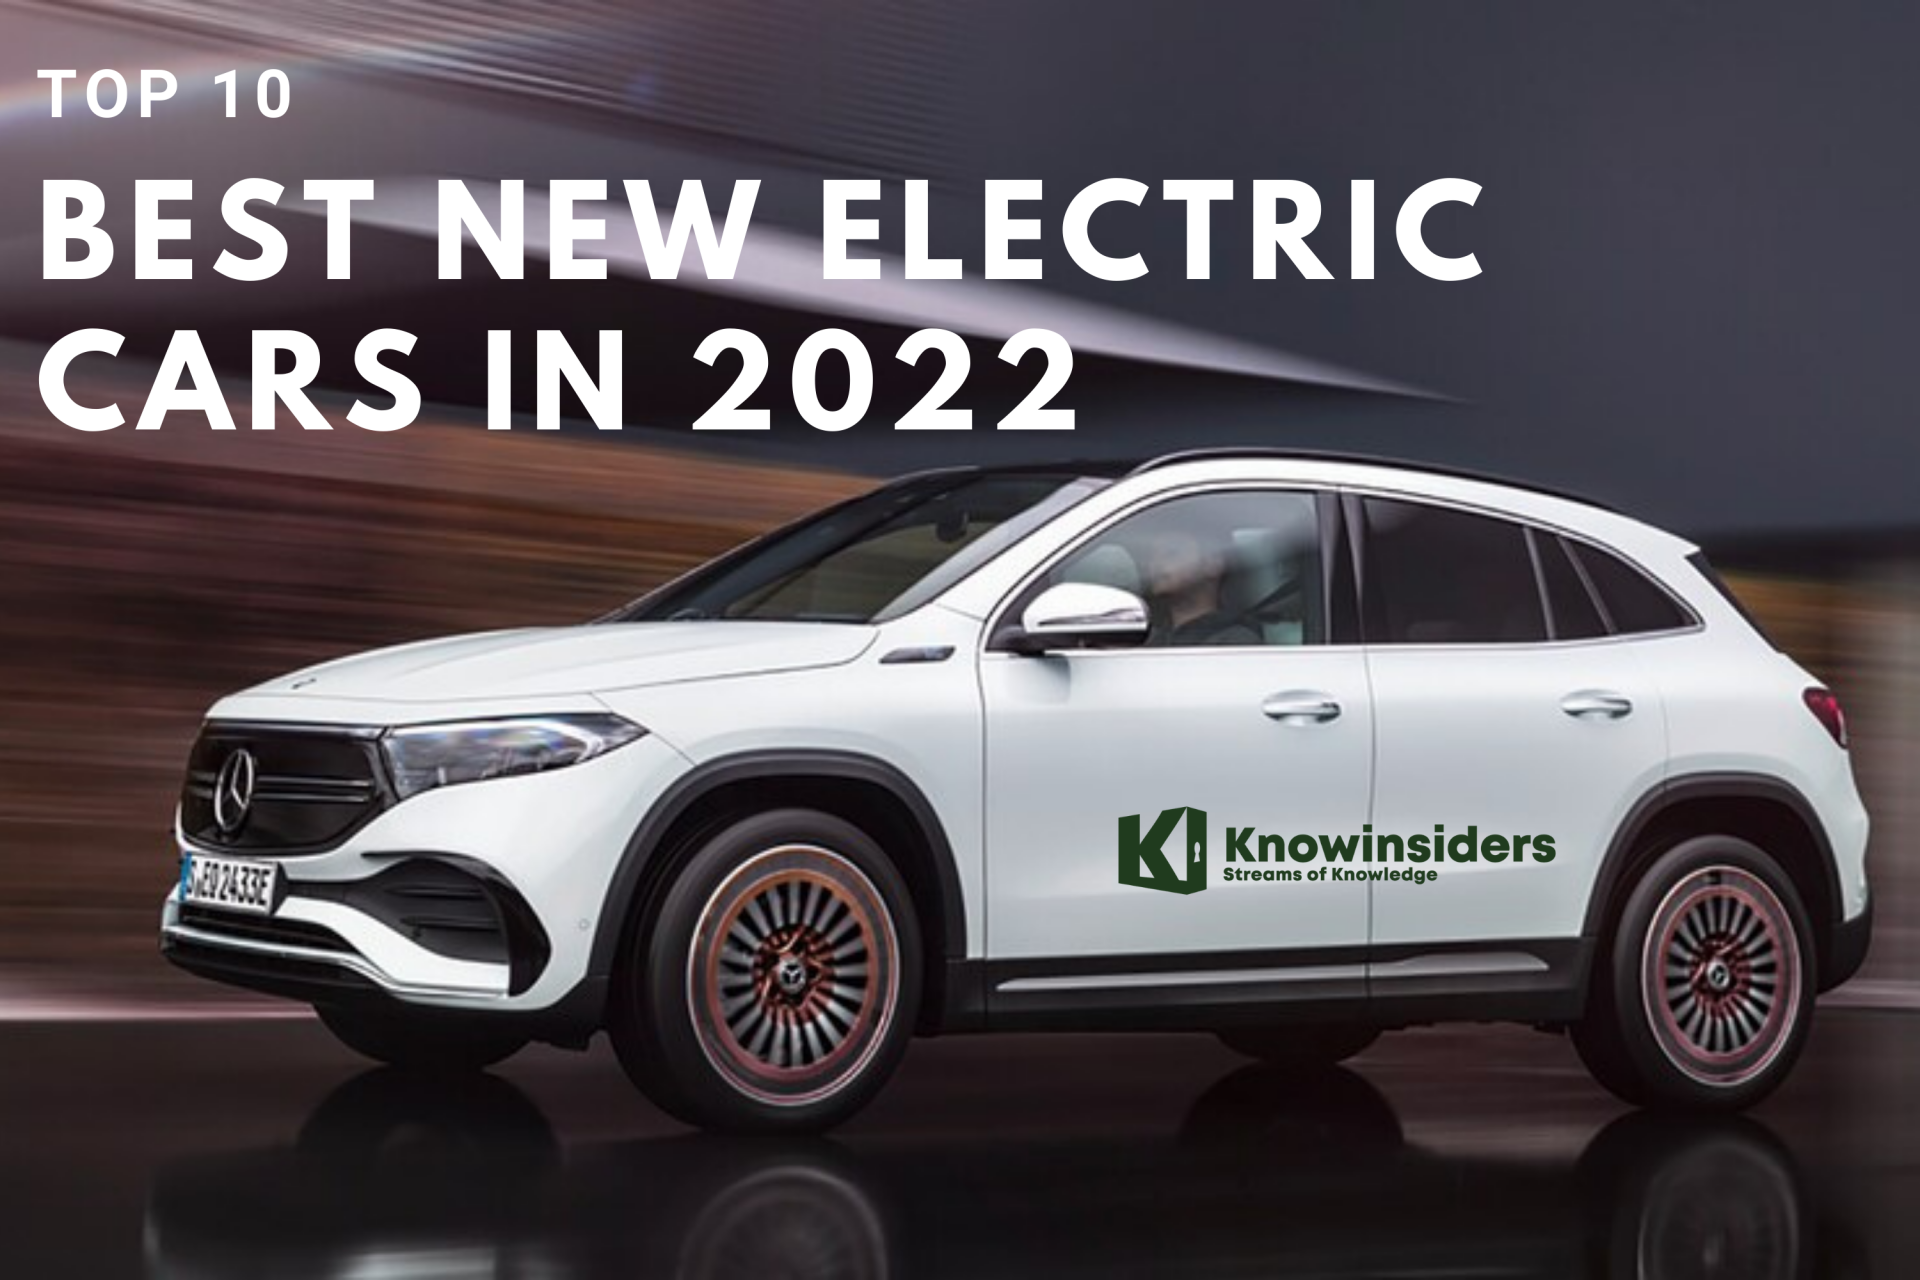 Top 10 Best New Electric Cars 2022